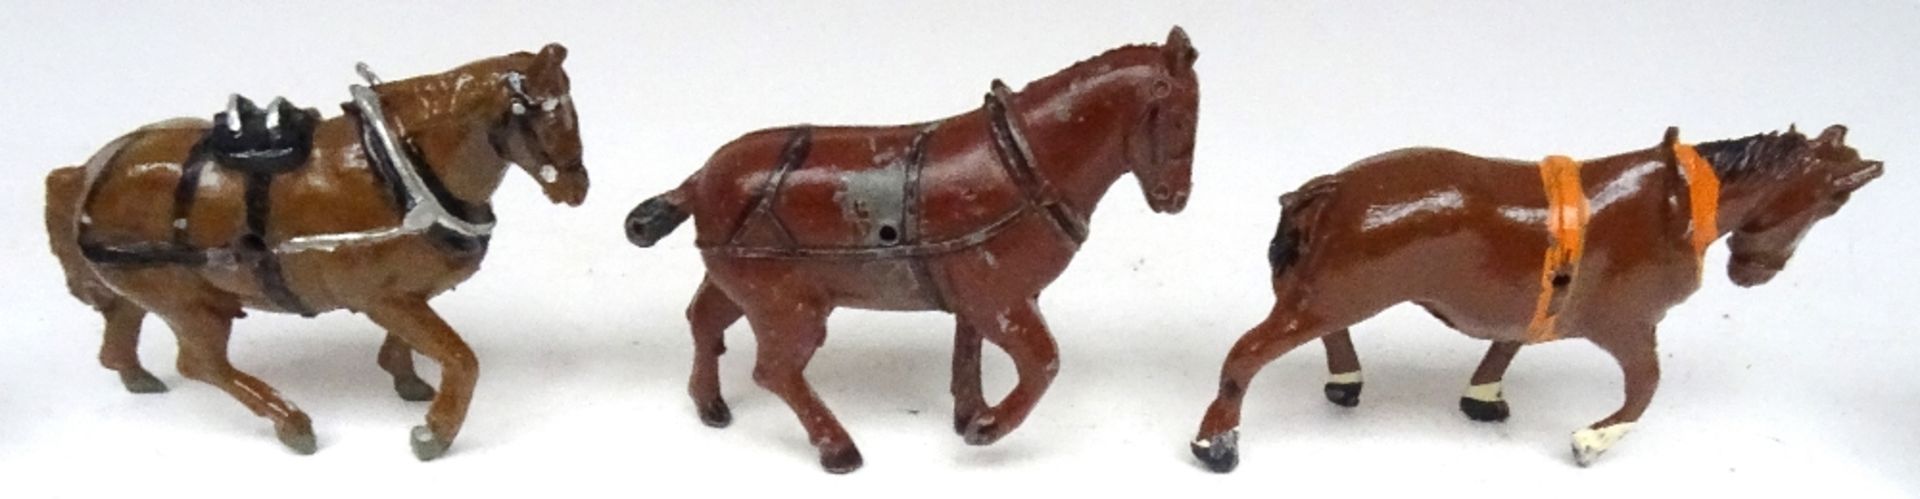 Cart and Field Horses by makers other than Britains - Image 4 of 6